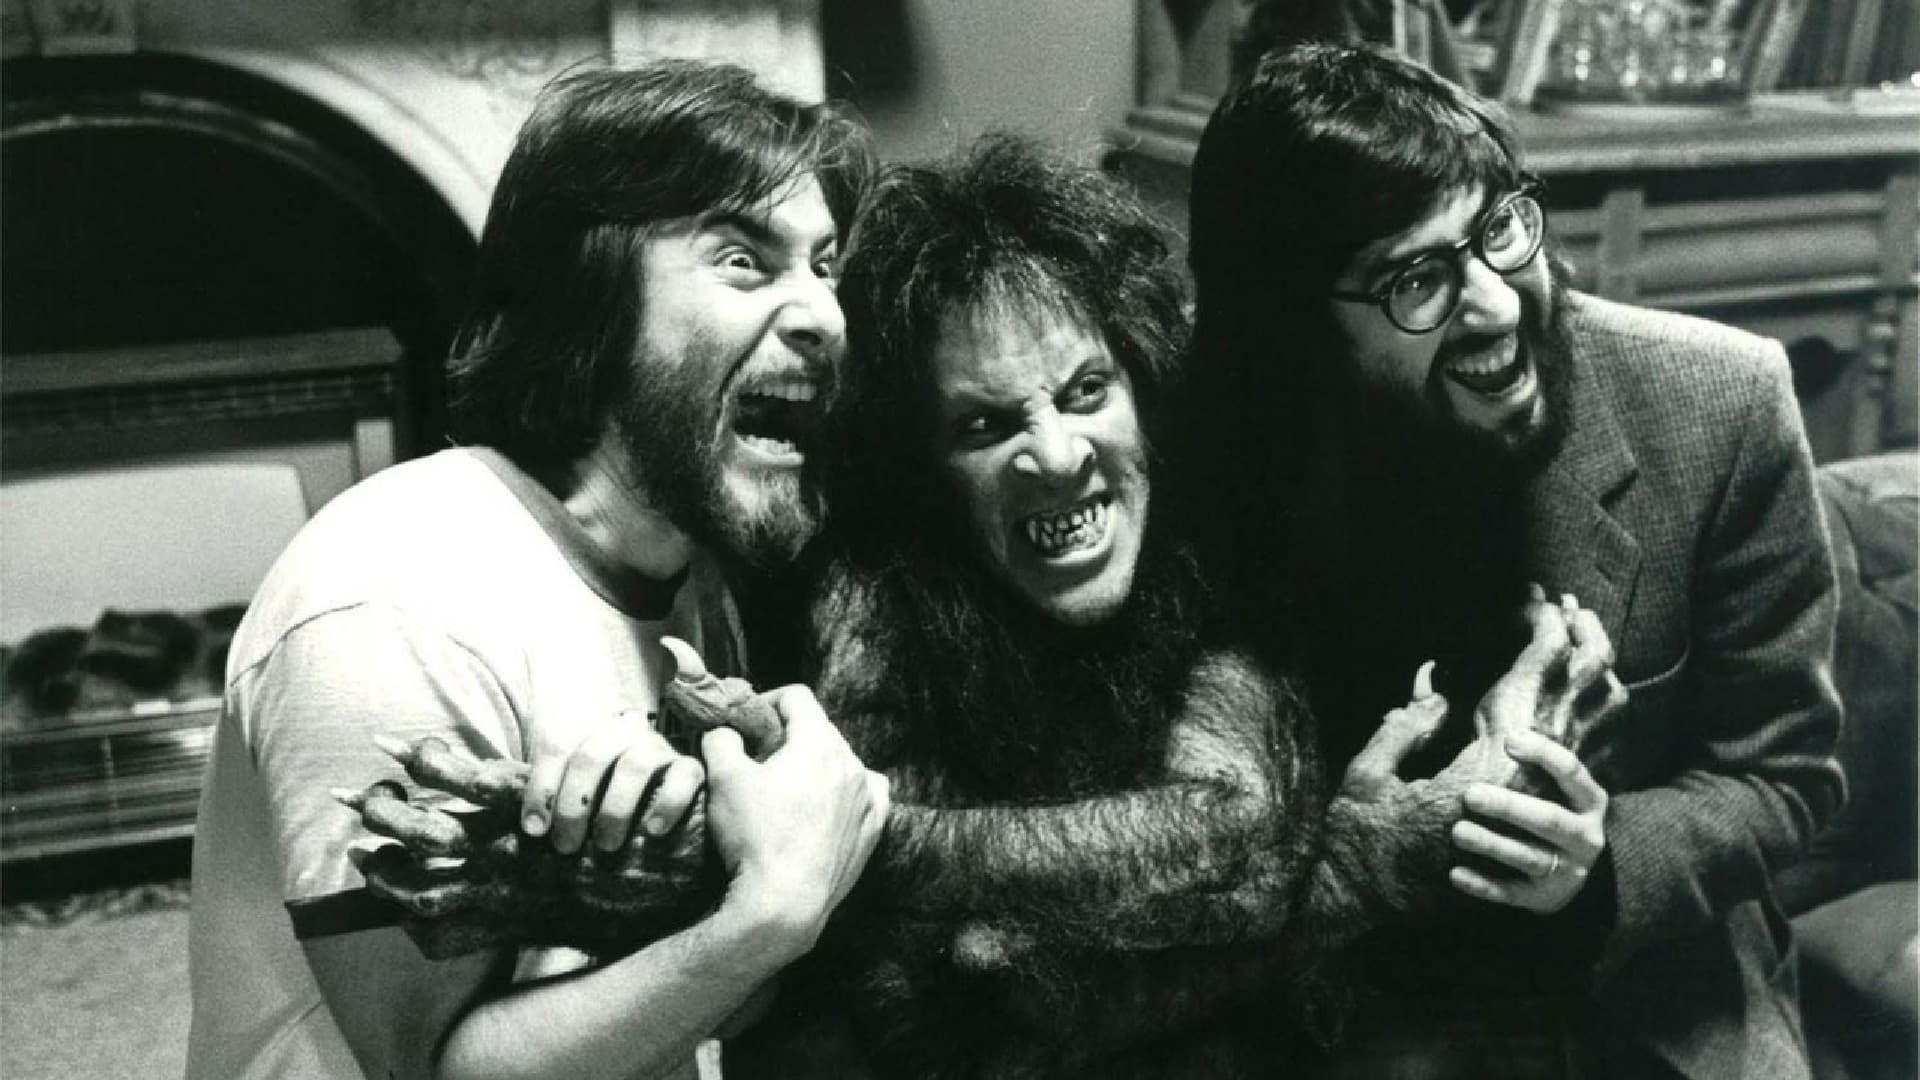 Beware the Moon: Remembering 'An American Werewolf in London' background